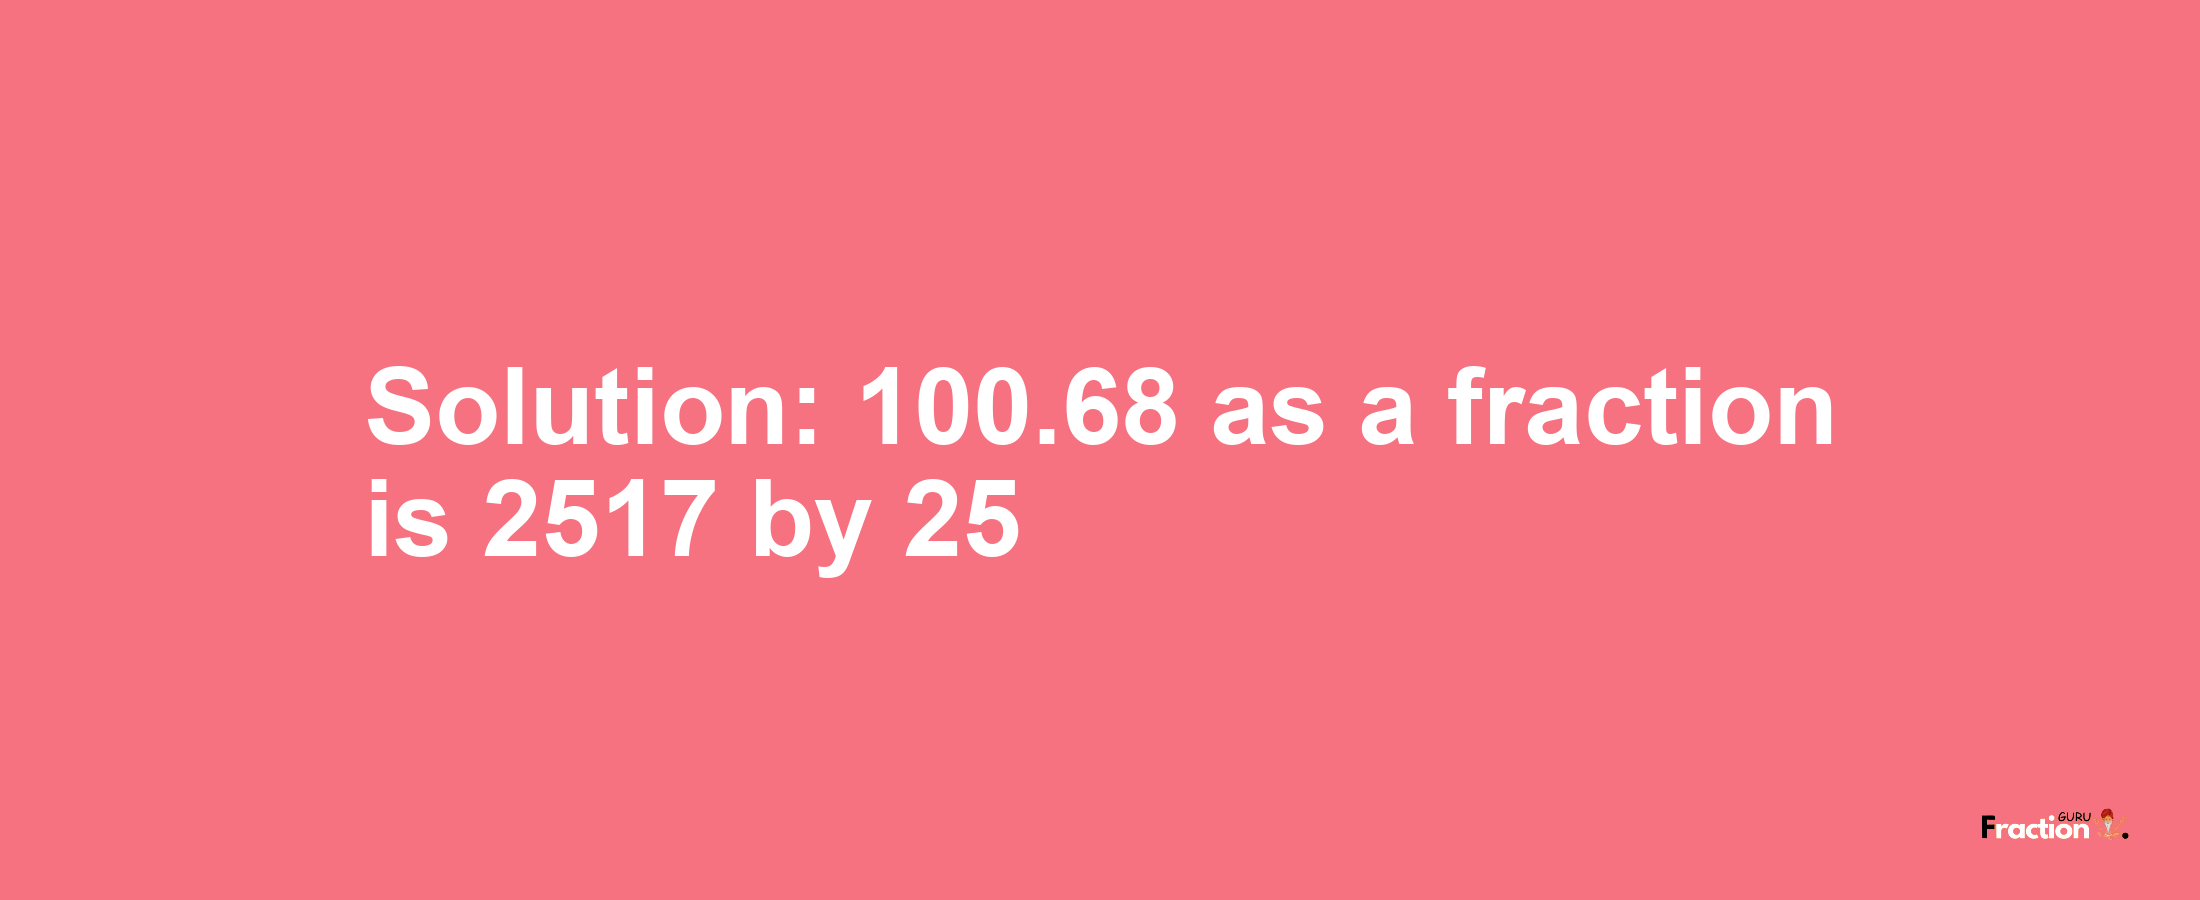 Solution:100.68 as a fraction is 2517/25